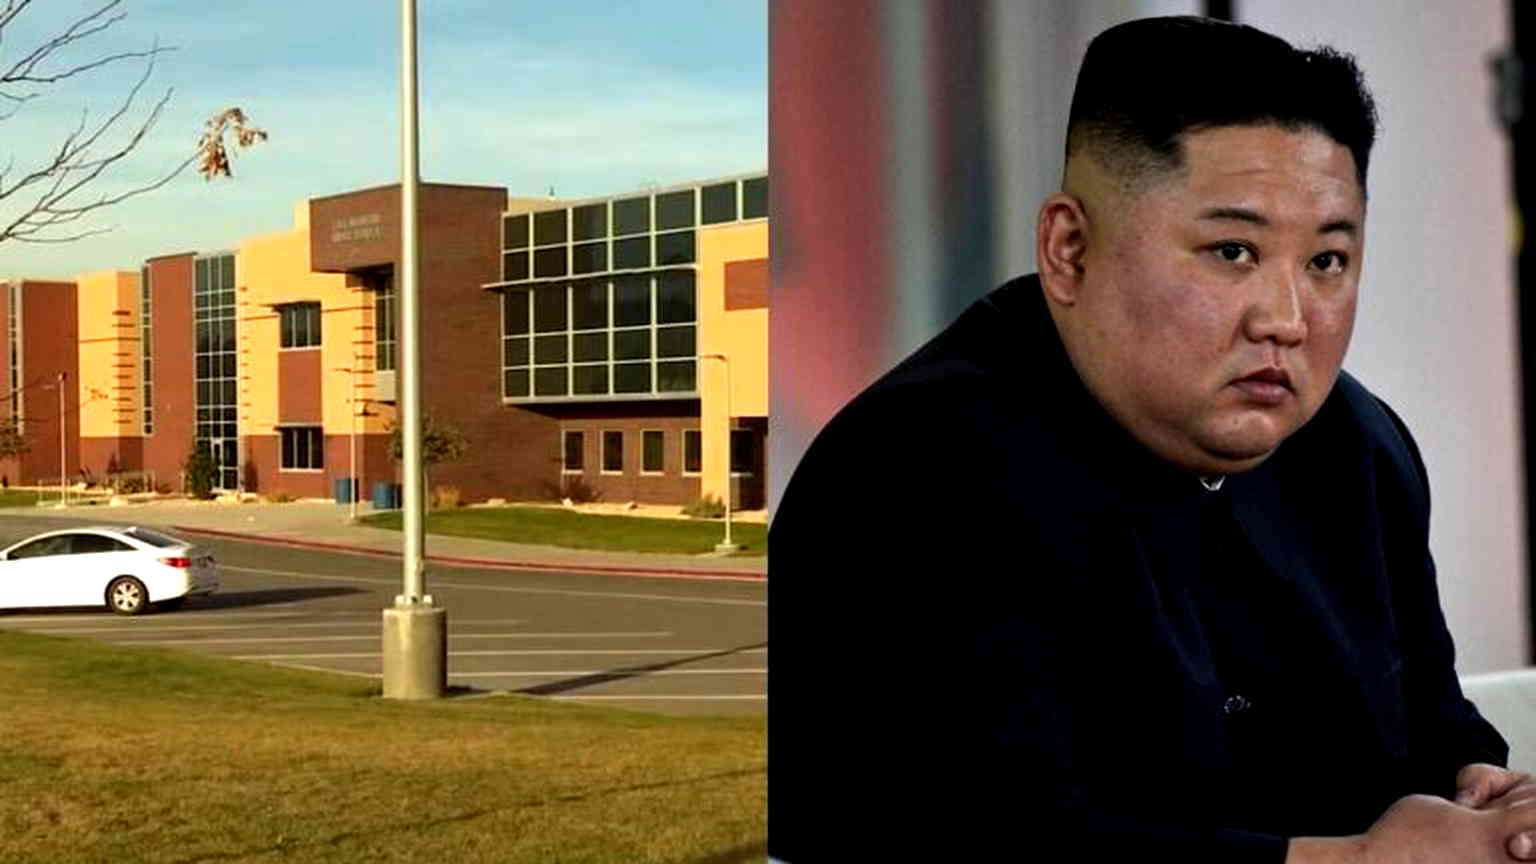 Utah father outraged after teacher compares his son, 12, to Kim Jong-un